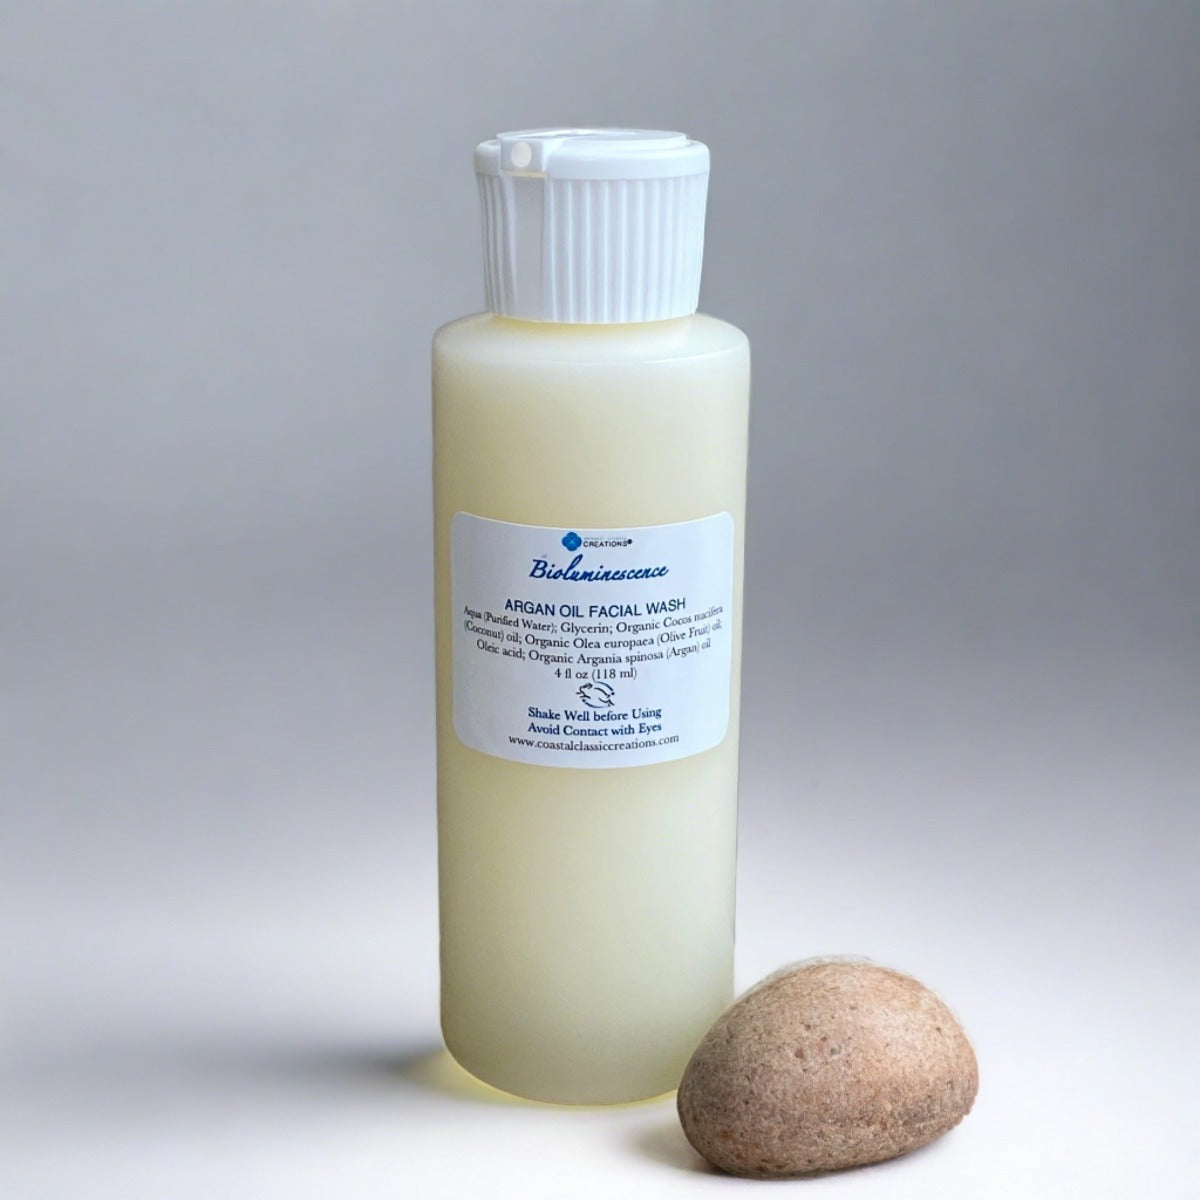 4 oz bottle of argan oil face wash with a white flip top cap labeled with the product name and ingredients, featuring a sleek, cylindrical shape